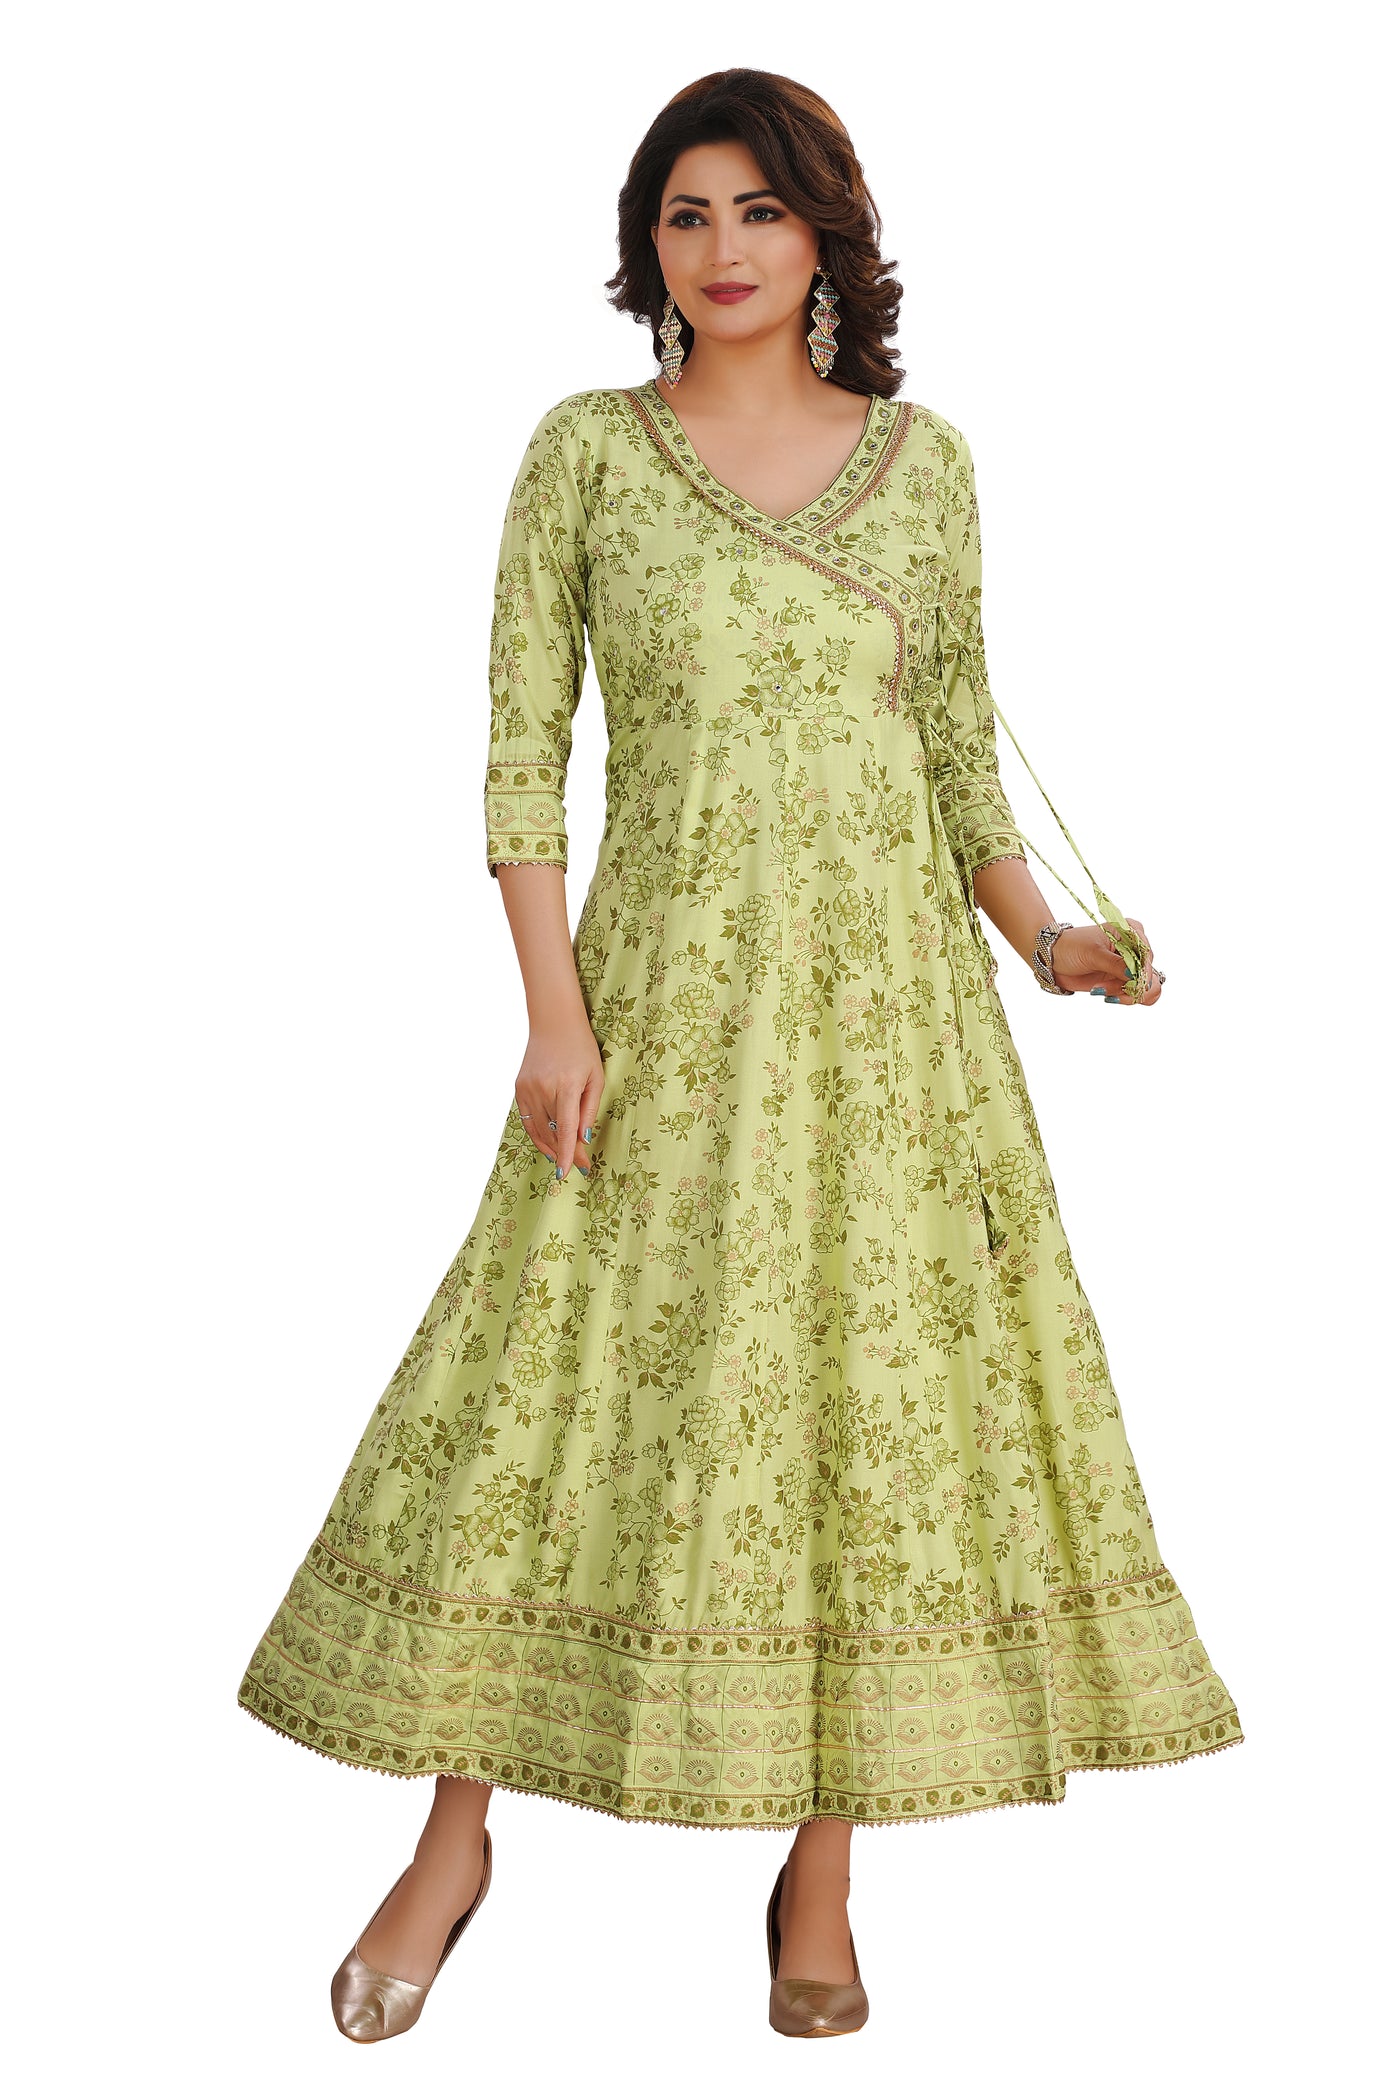 GREEN FIT AND FLARE FULL LENGTH KURTI - Sakkhi Style